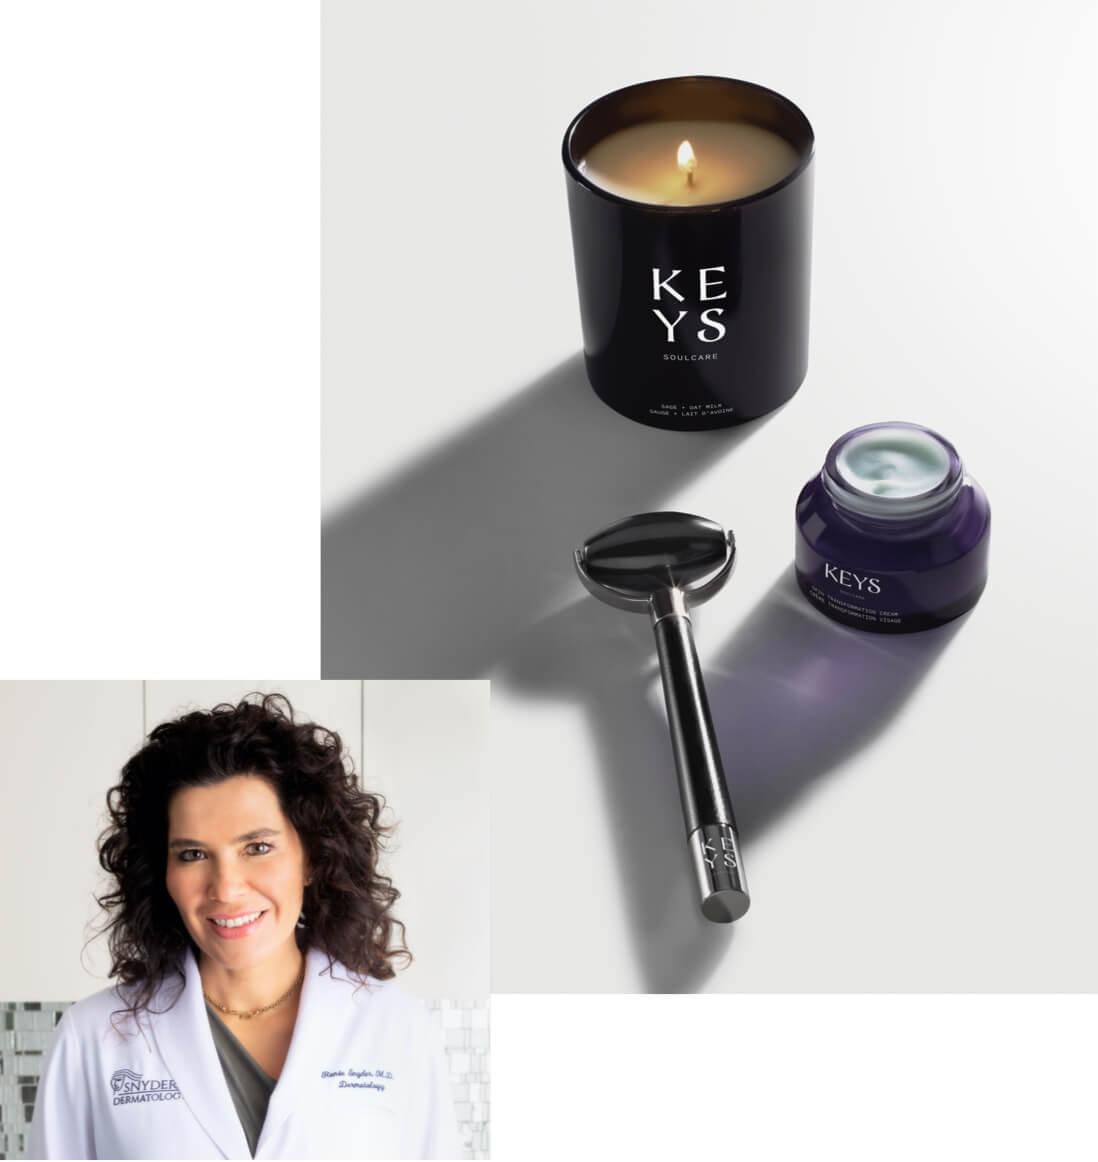 Keys Soulcare products and Dr. Renée Snyder